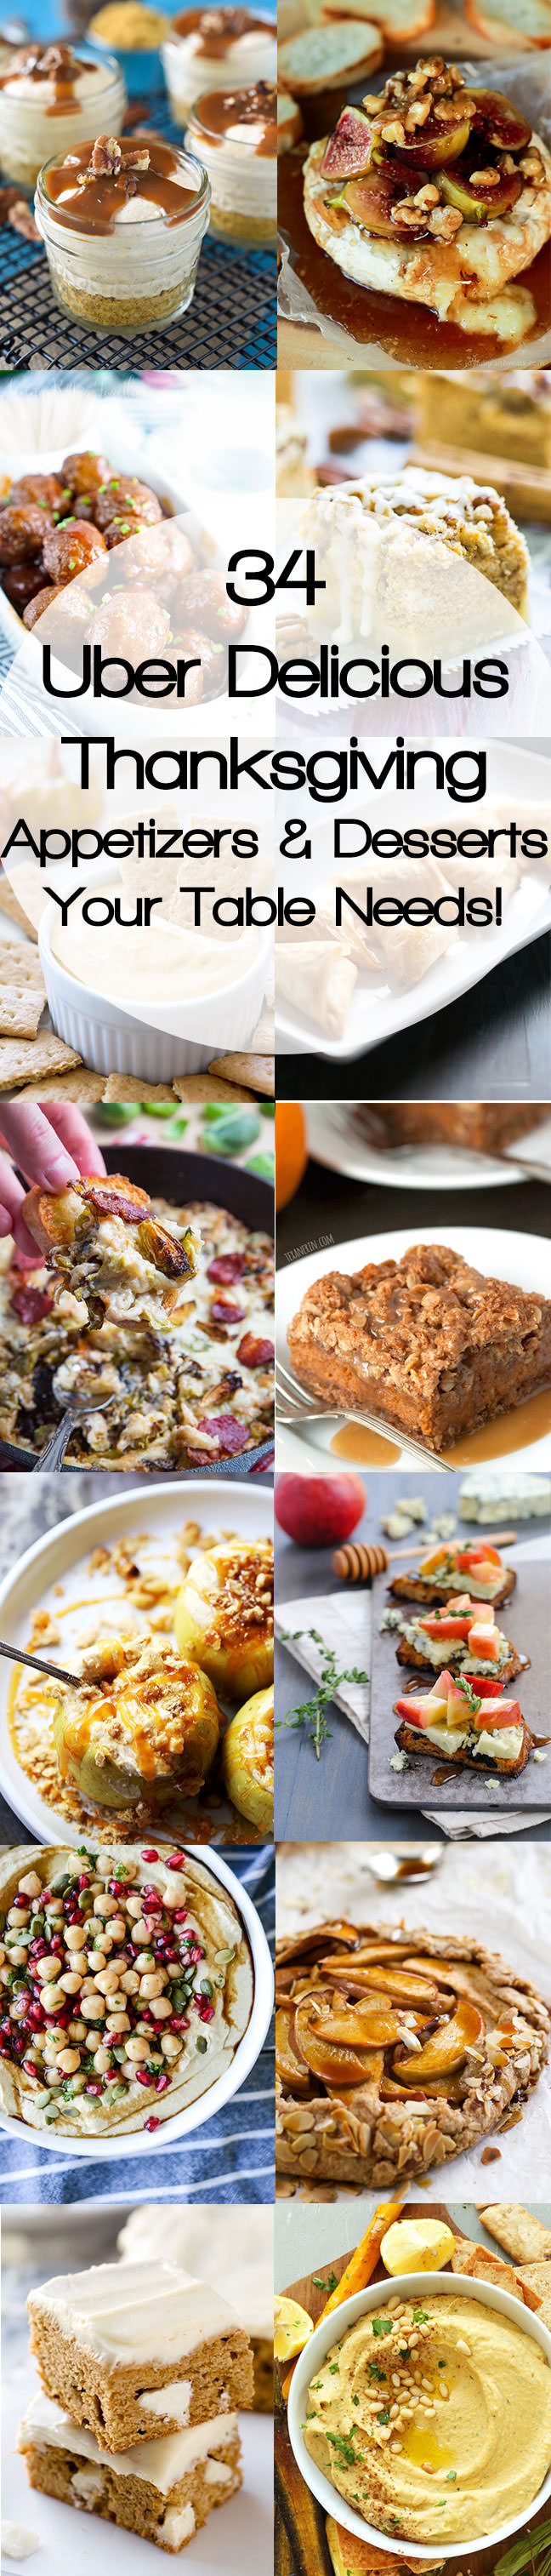 Healthy Thanksgiving Appetizer Recipes
 Healthy Thanksgiving Appetizers & Desserts